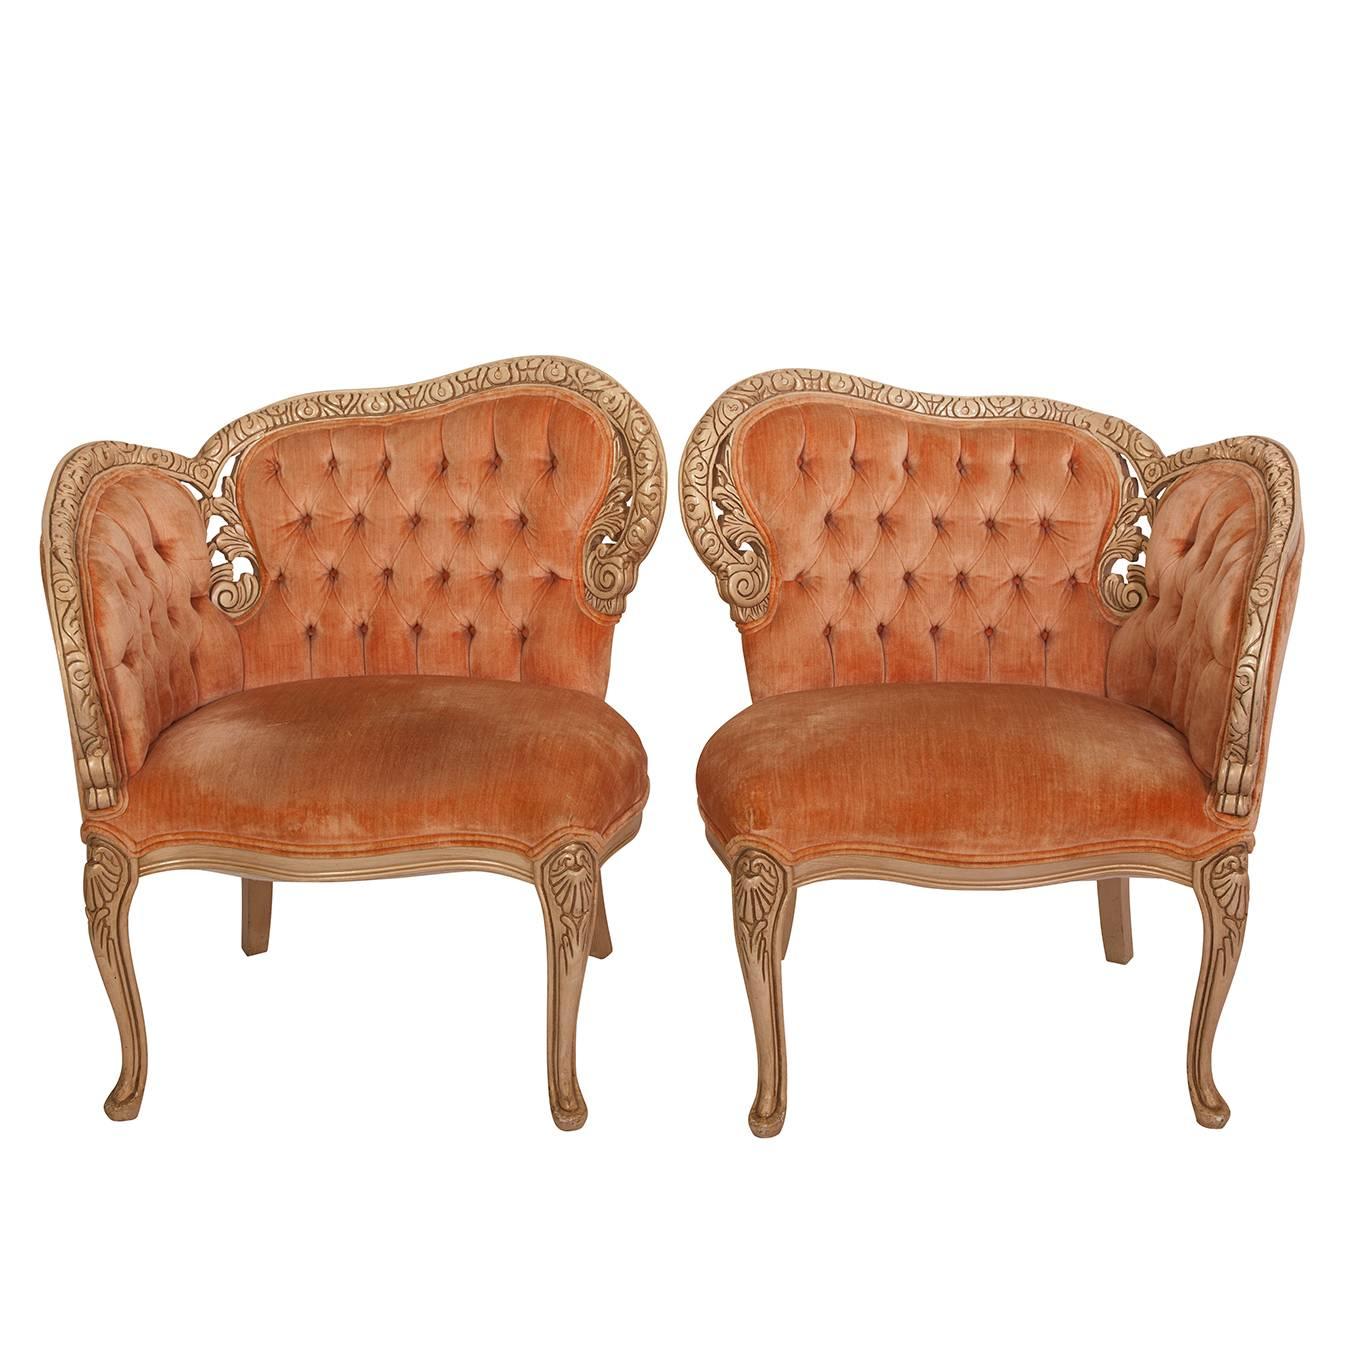 19th Century Tufted French Side Chairs in Coral Velvet